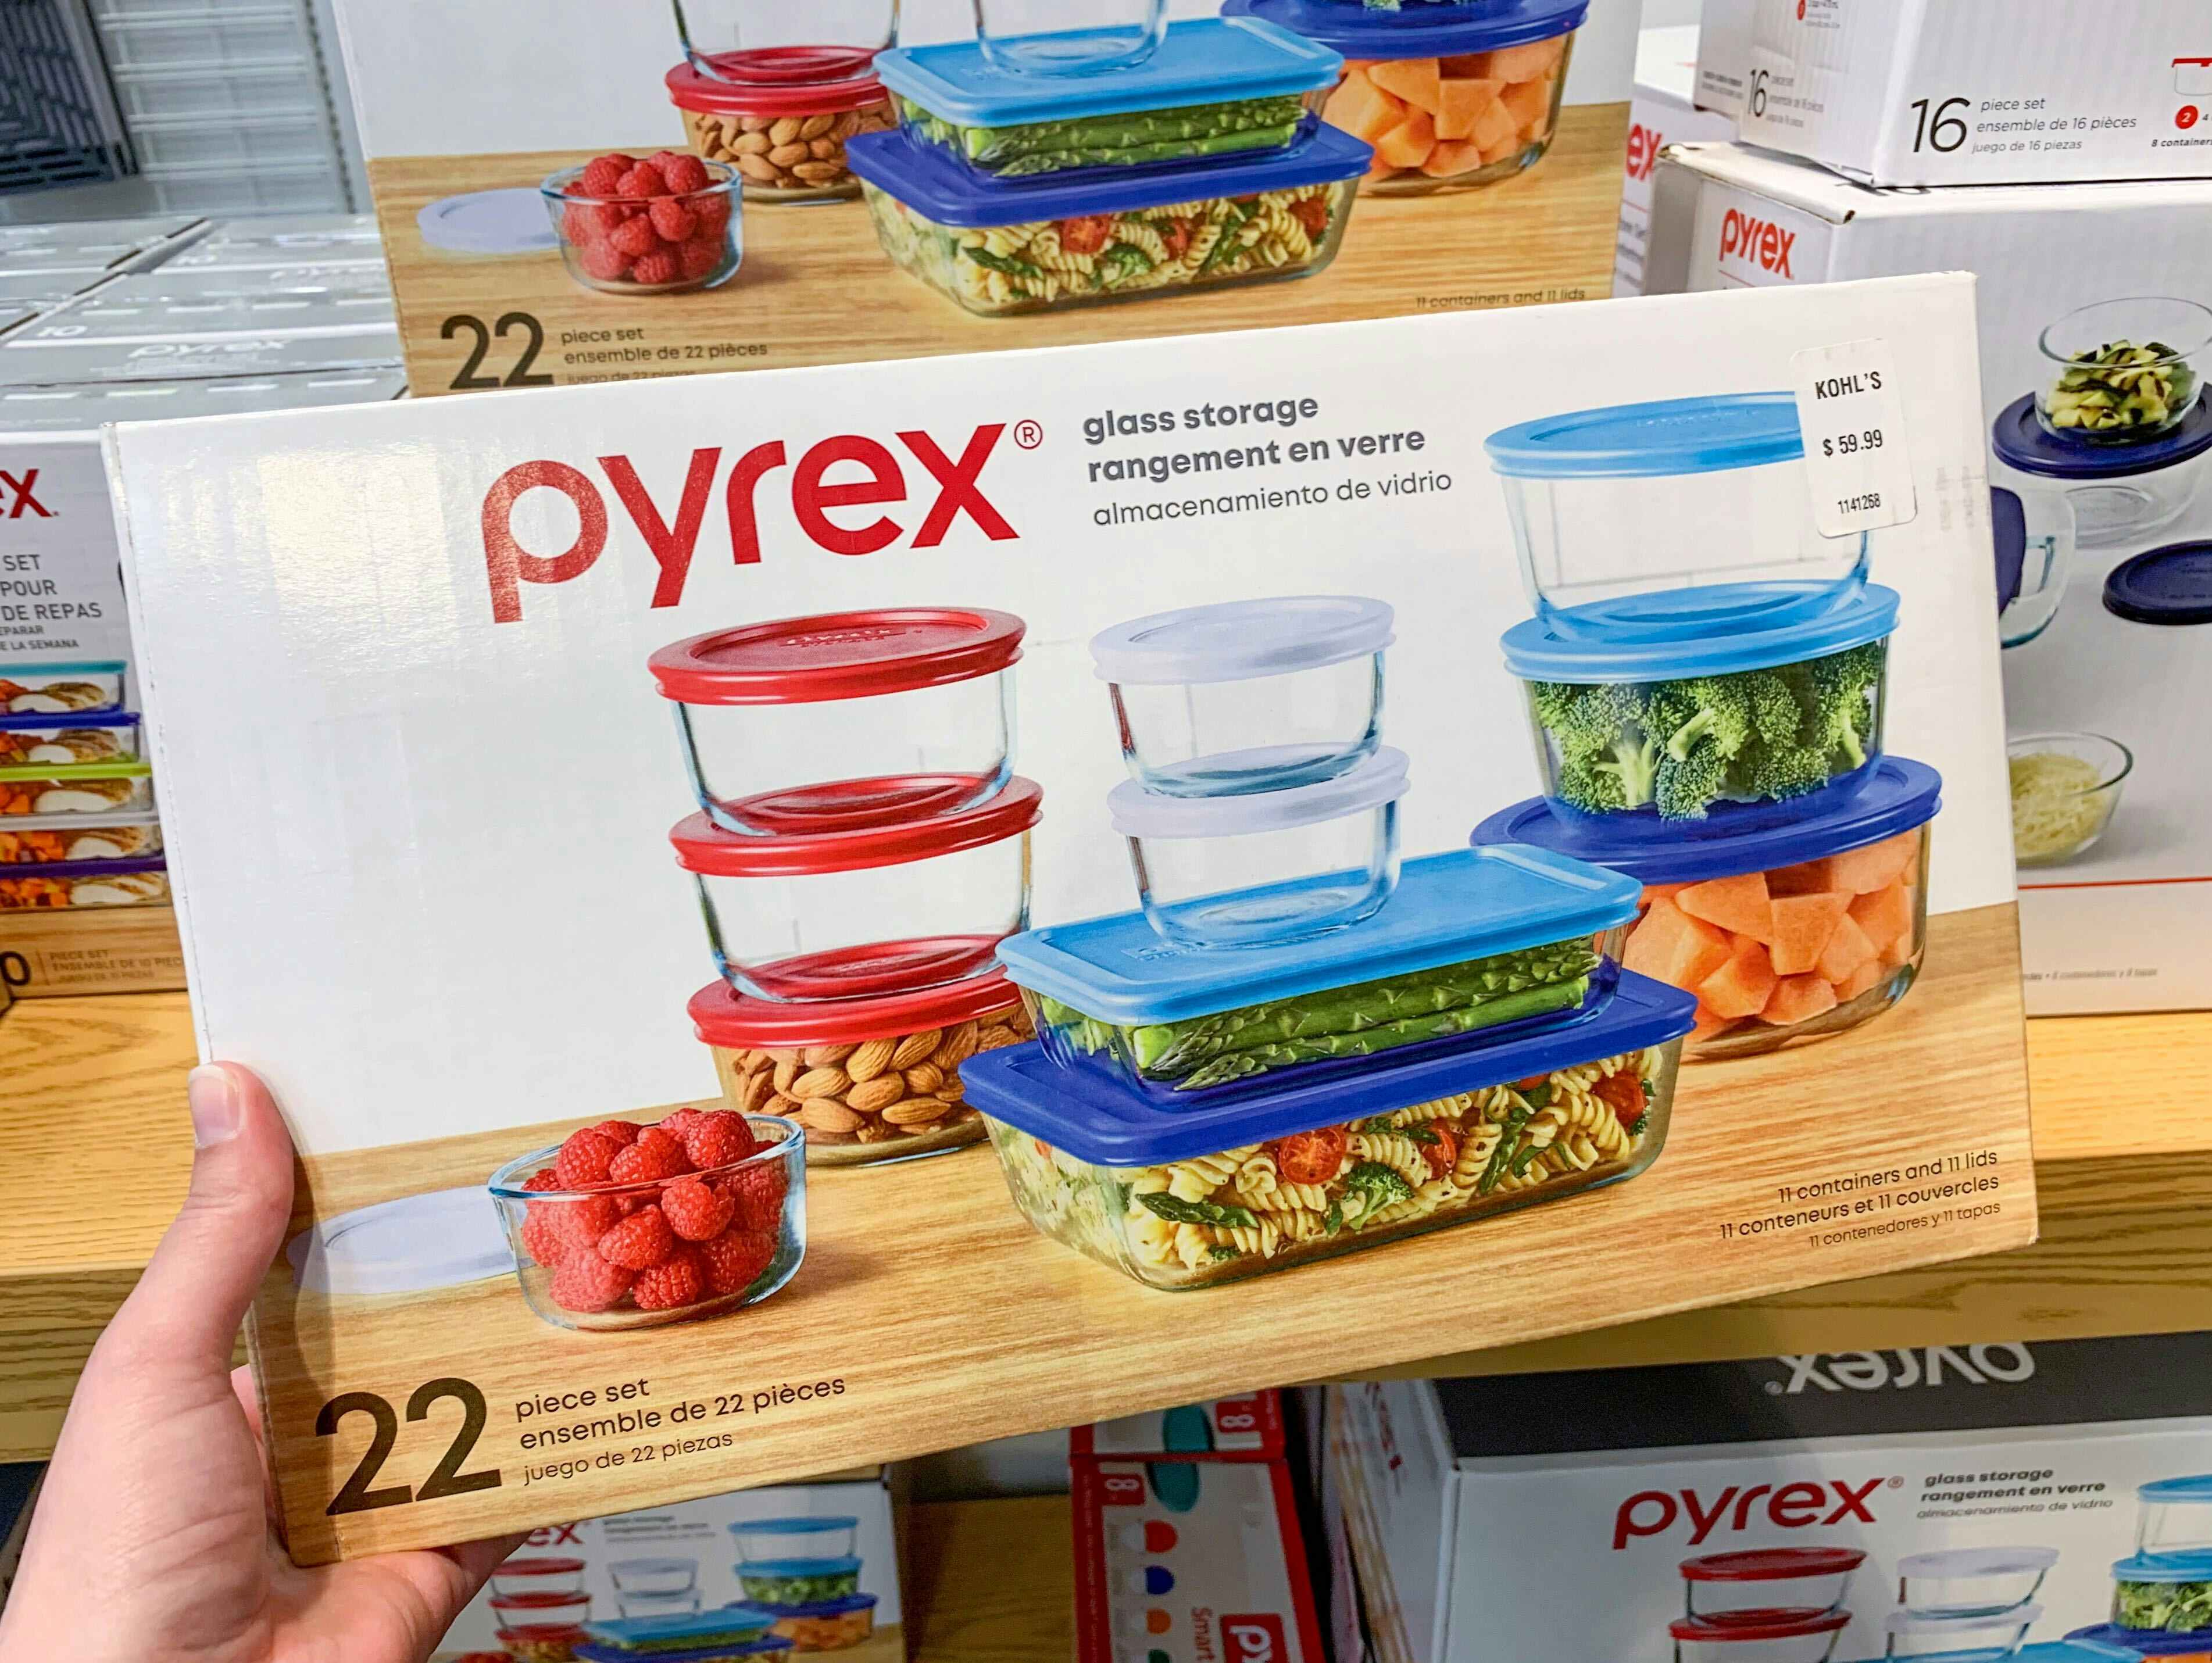 Pyrex glass mixing bowl/food storage sets with lids for $15 (Reg. up to $28)